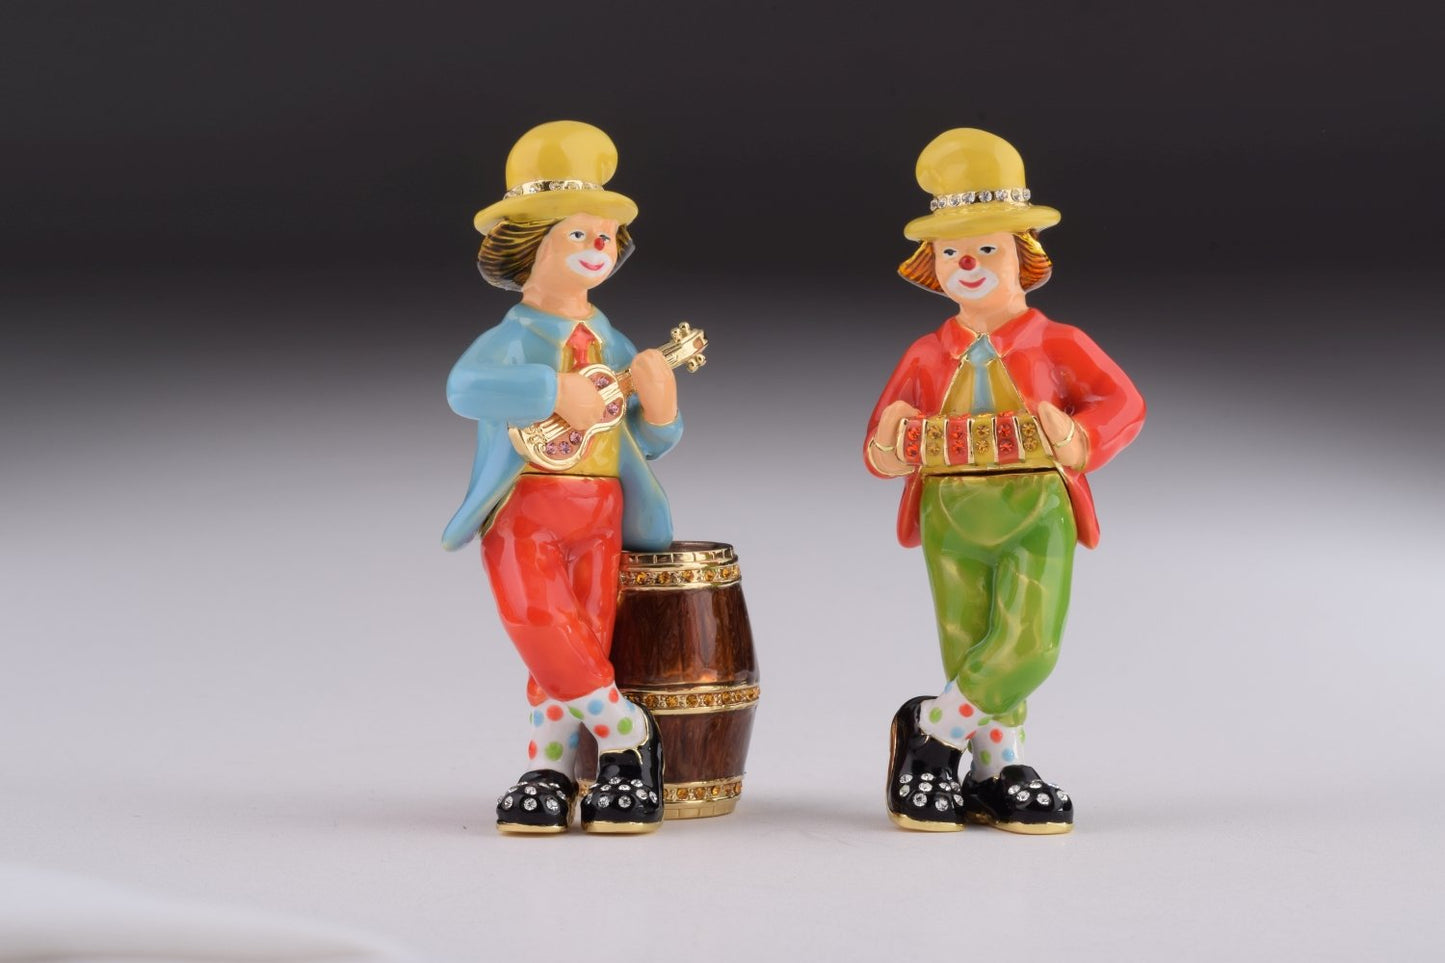 Two Circus Clowns Playing Music